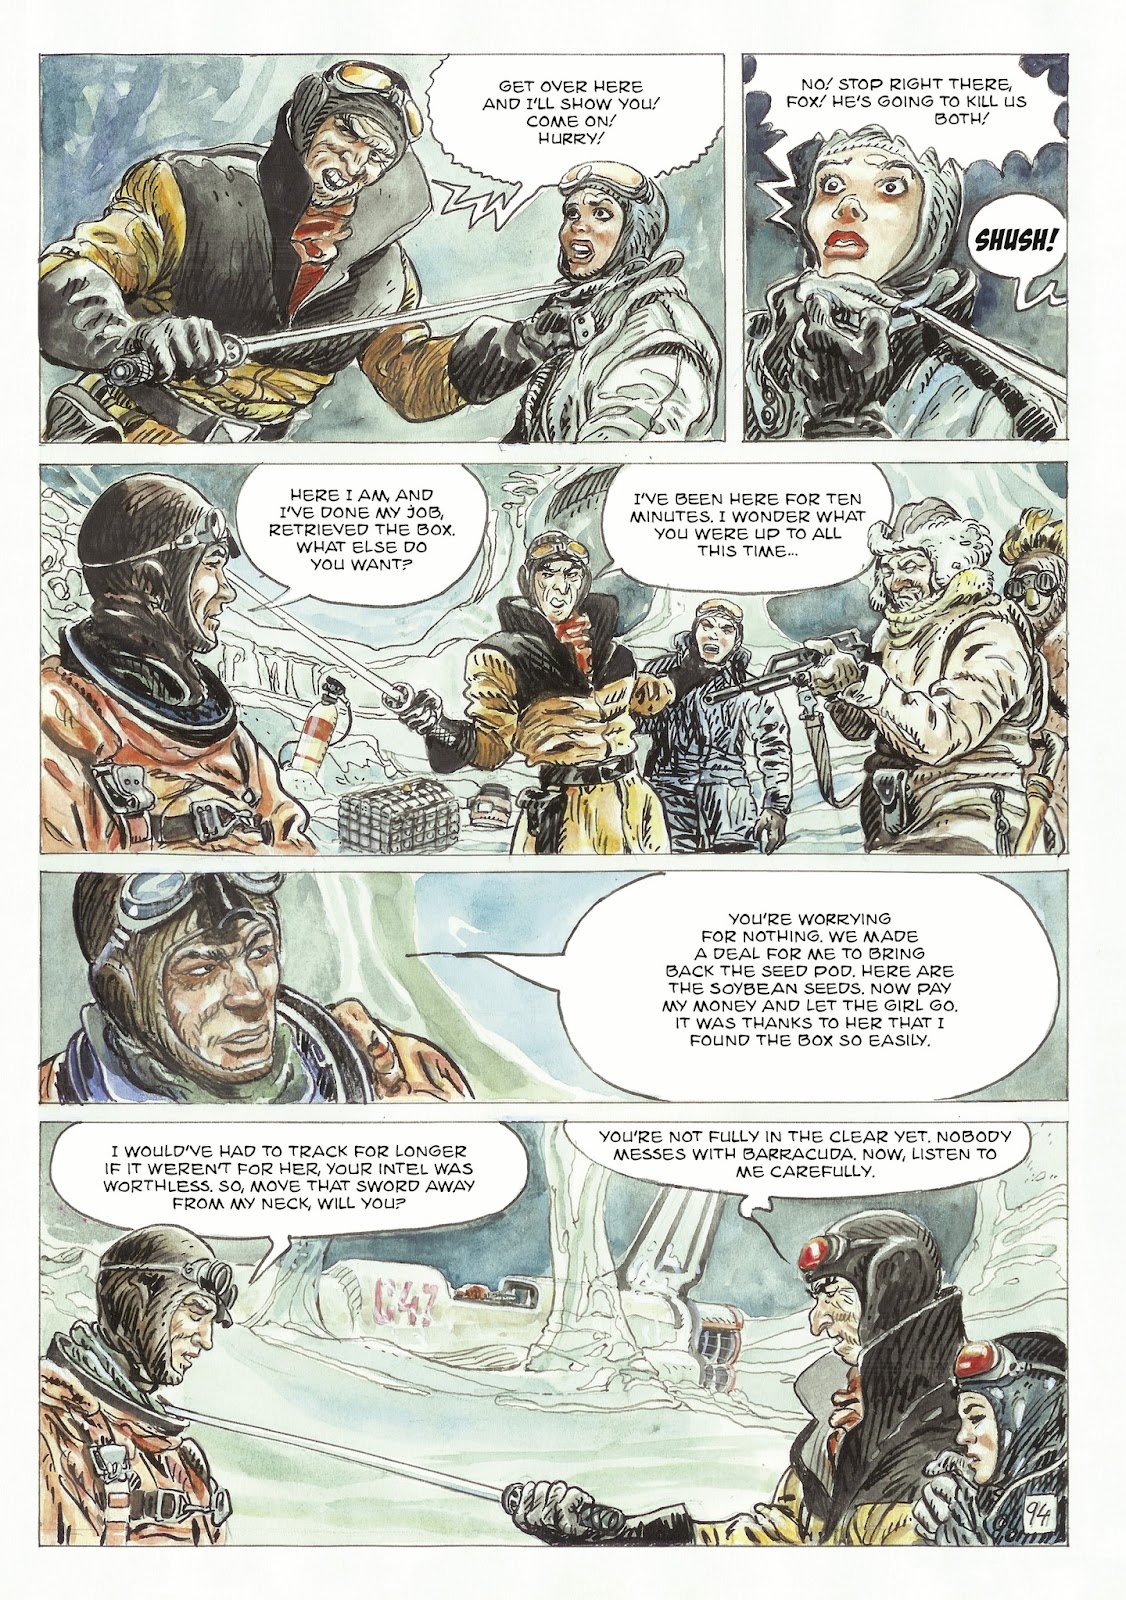 The Man With the Bear issue 2 - Page 40